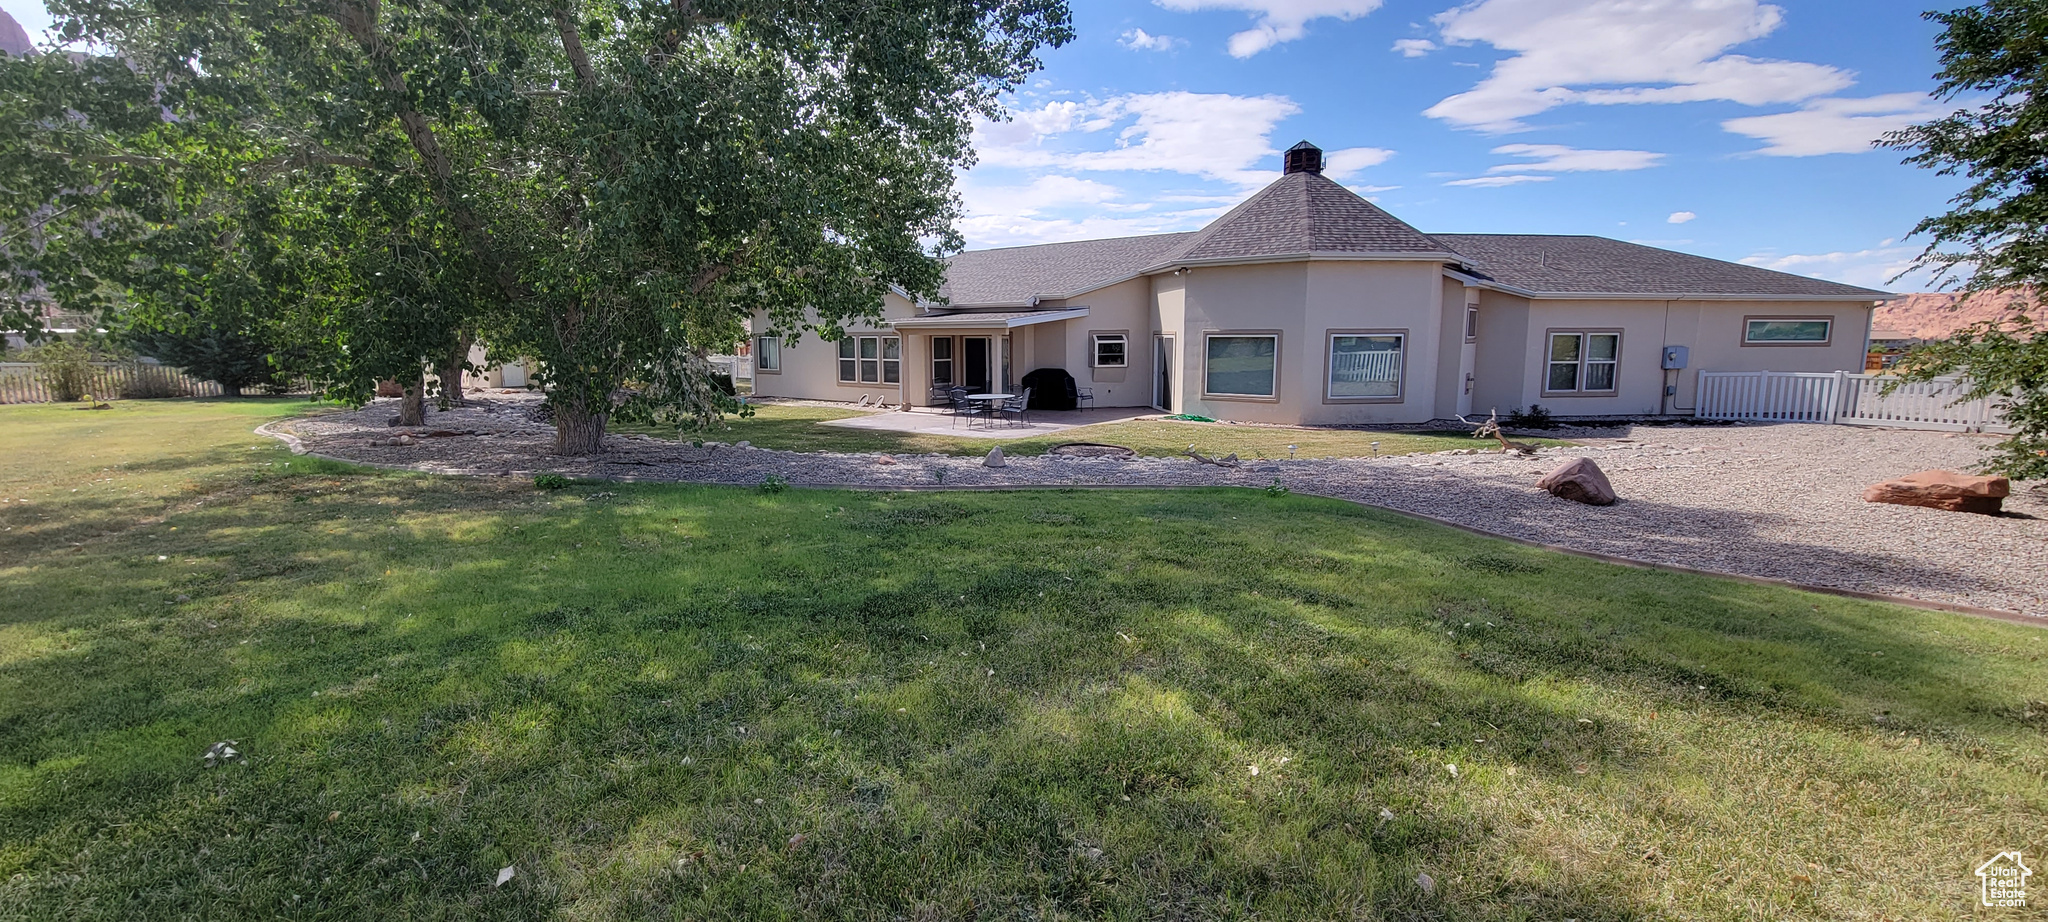 4620 SUNNY ACRES, Moab, Utah 84532, 4 Bedrooms Bedrooms, 11 Rooms Rooms,2 BathroomsBathrooms,Residential,For sale,SUNNY ACRES,1986884